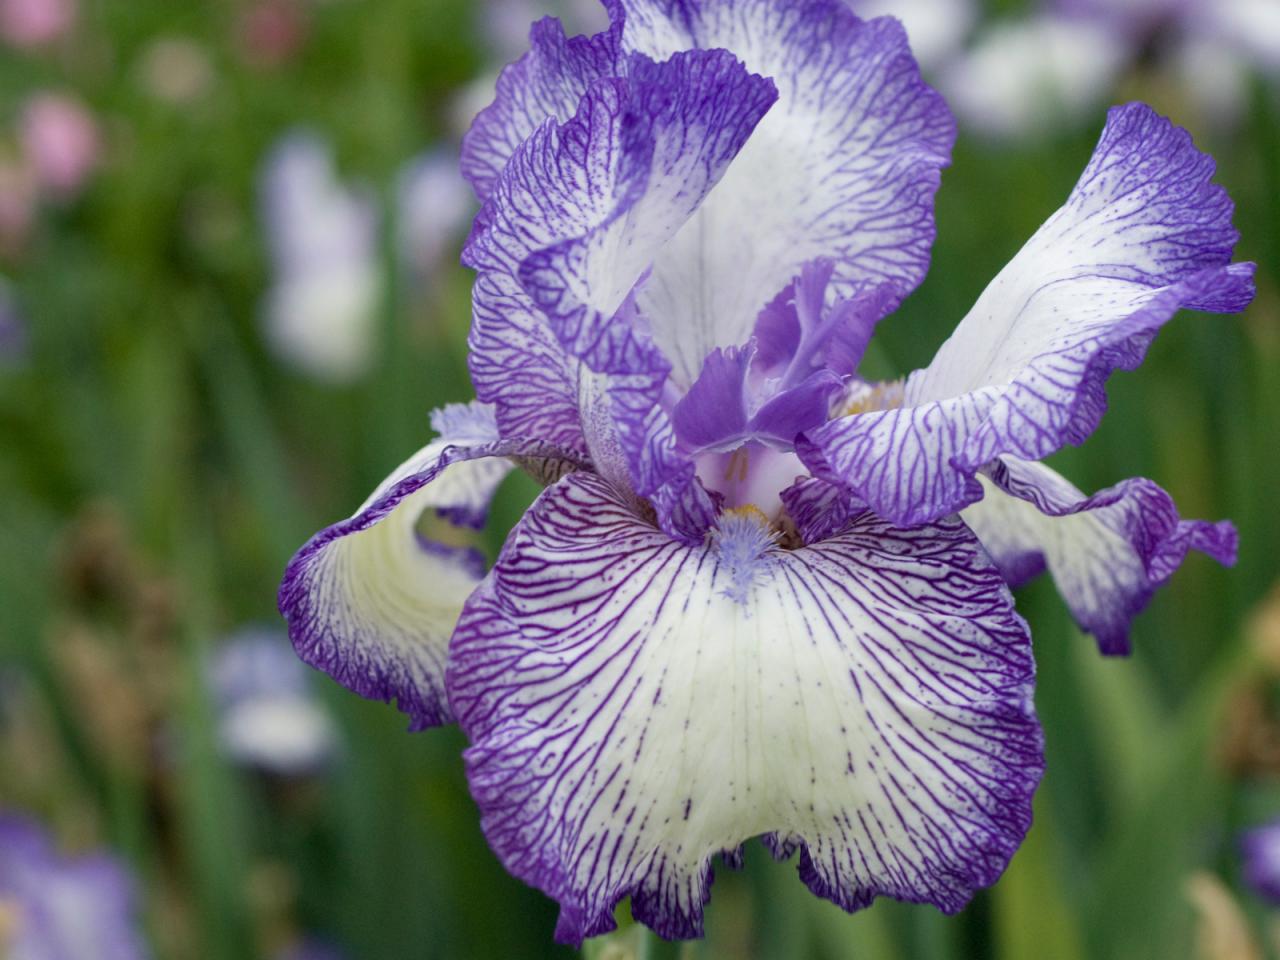 Iris flower: Facts, growth and maintenance tips in 2023